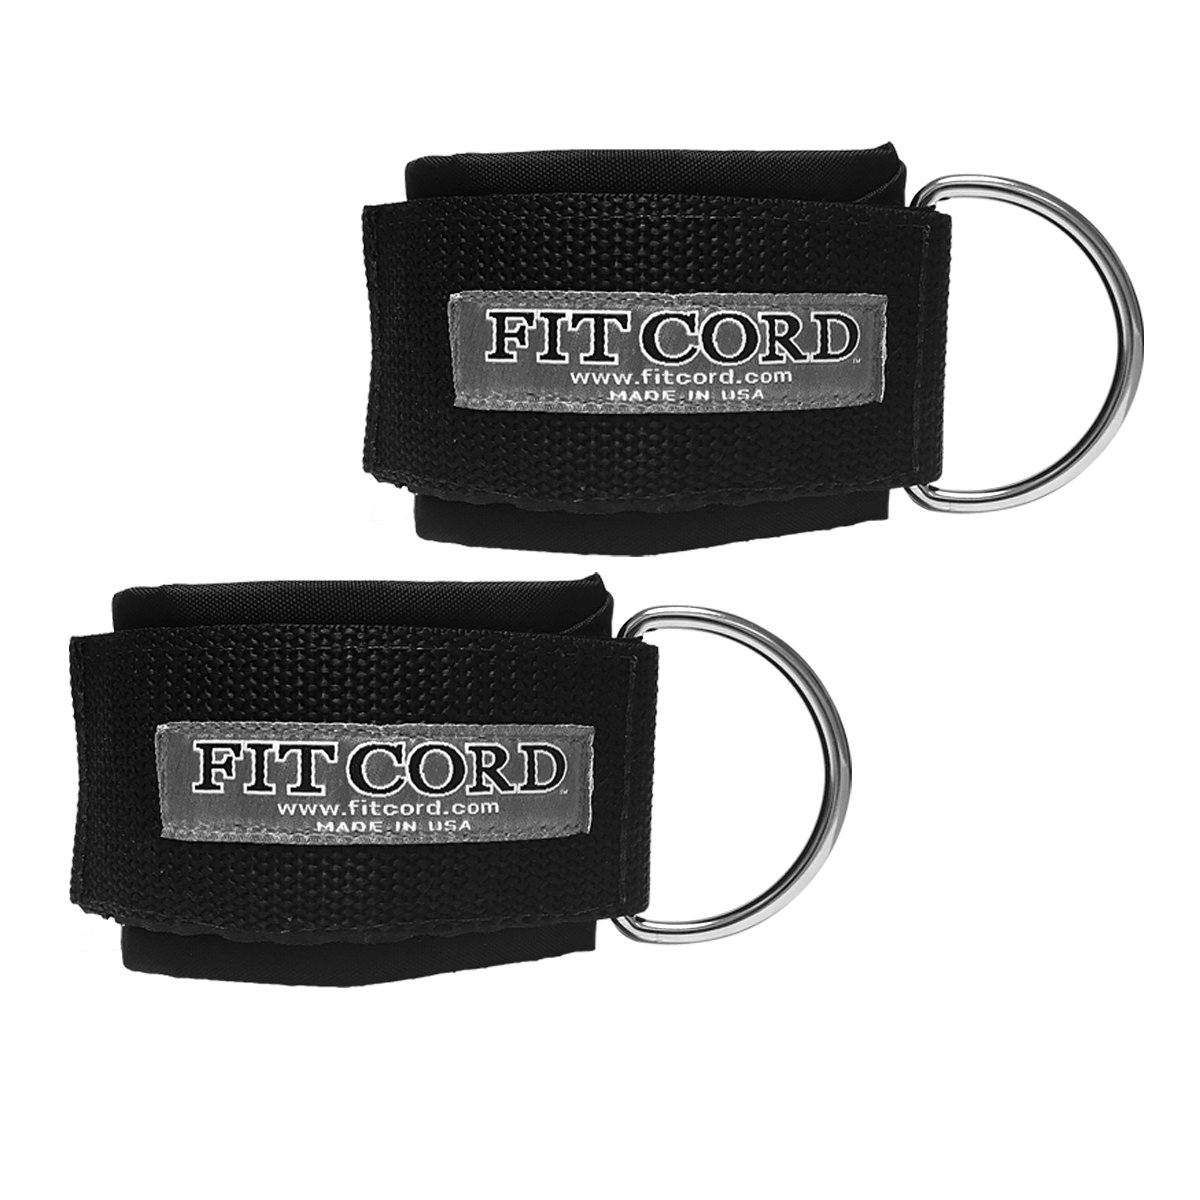 Fitness Ankle Cuffs (1 Pair) best resistance bands made in USA and covered for safety - FitCord Resistance Bands